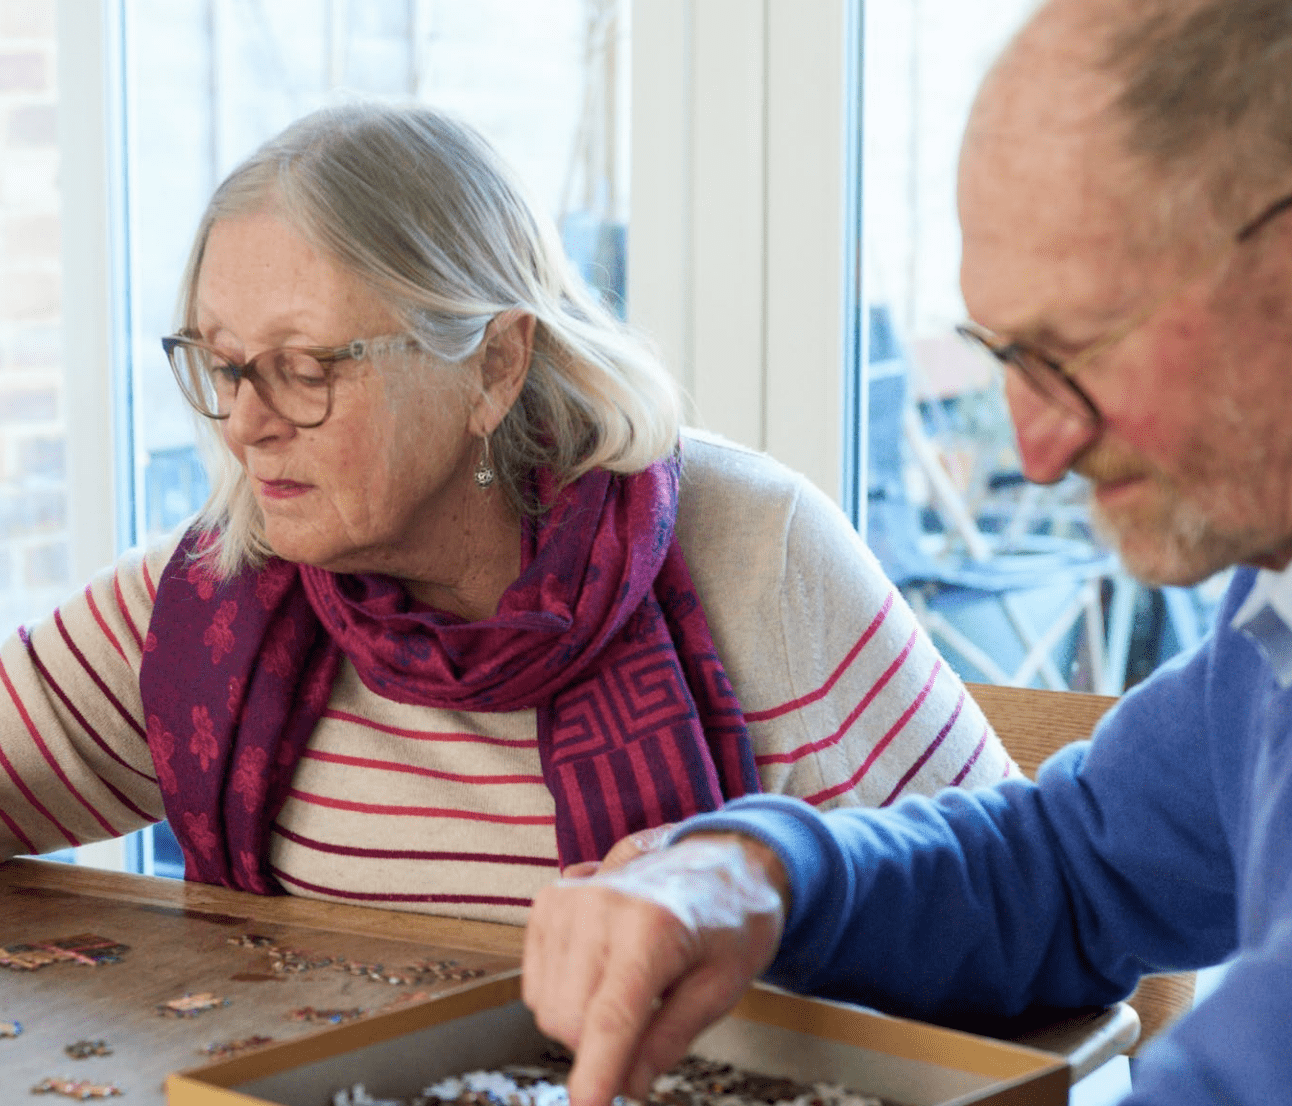 An older couple - a man and woman - do a jigsaw puzzle together at a table